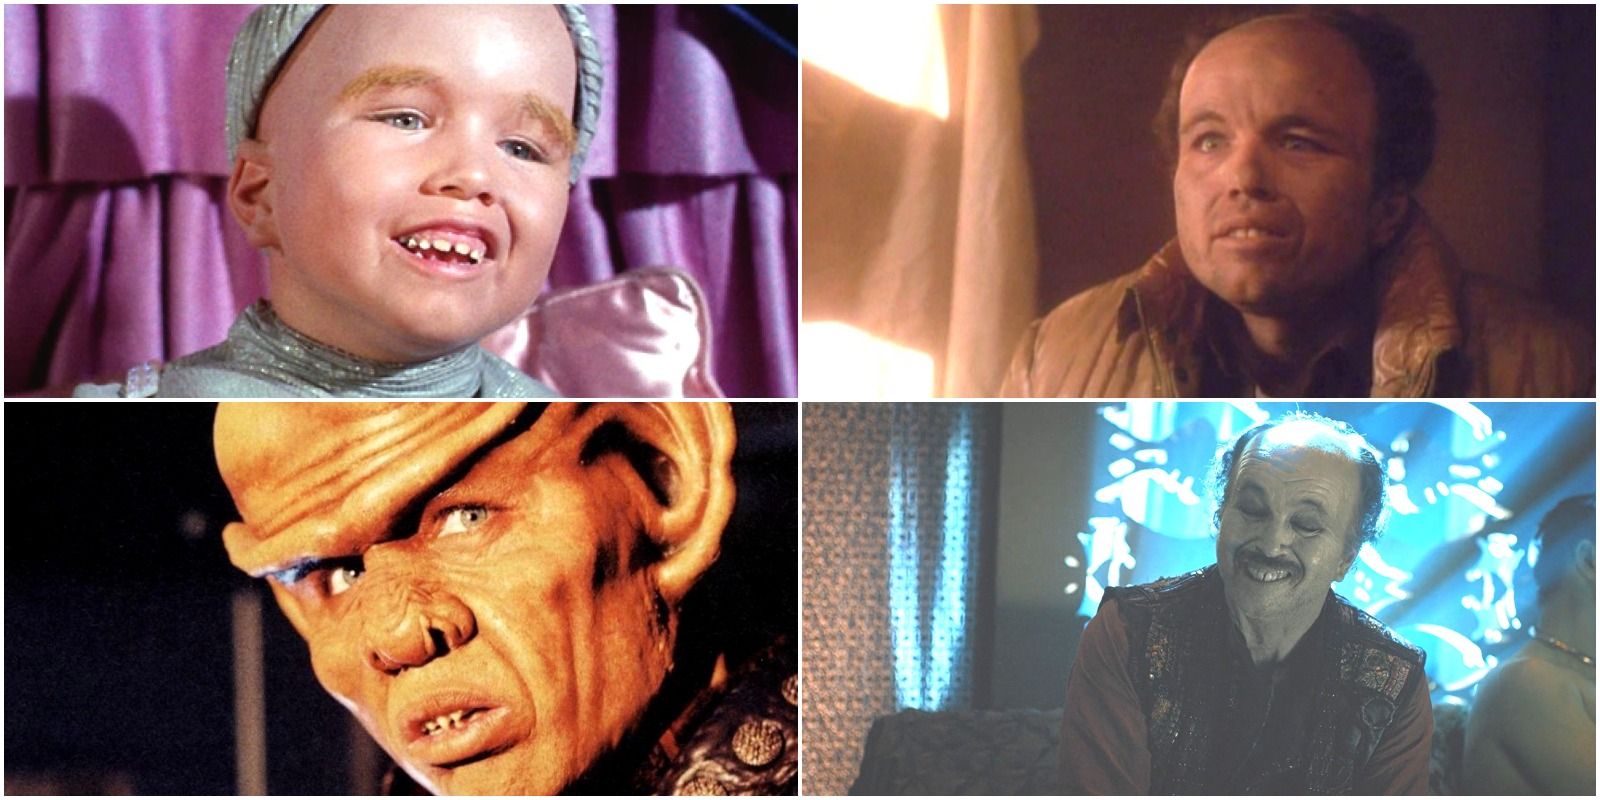 Clint Howard as an Orion, a Ferengi, and an alien from TOS, DS9, Enterprise, and Discovery